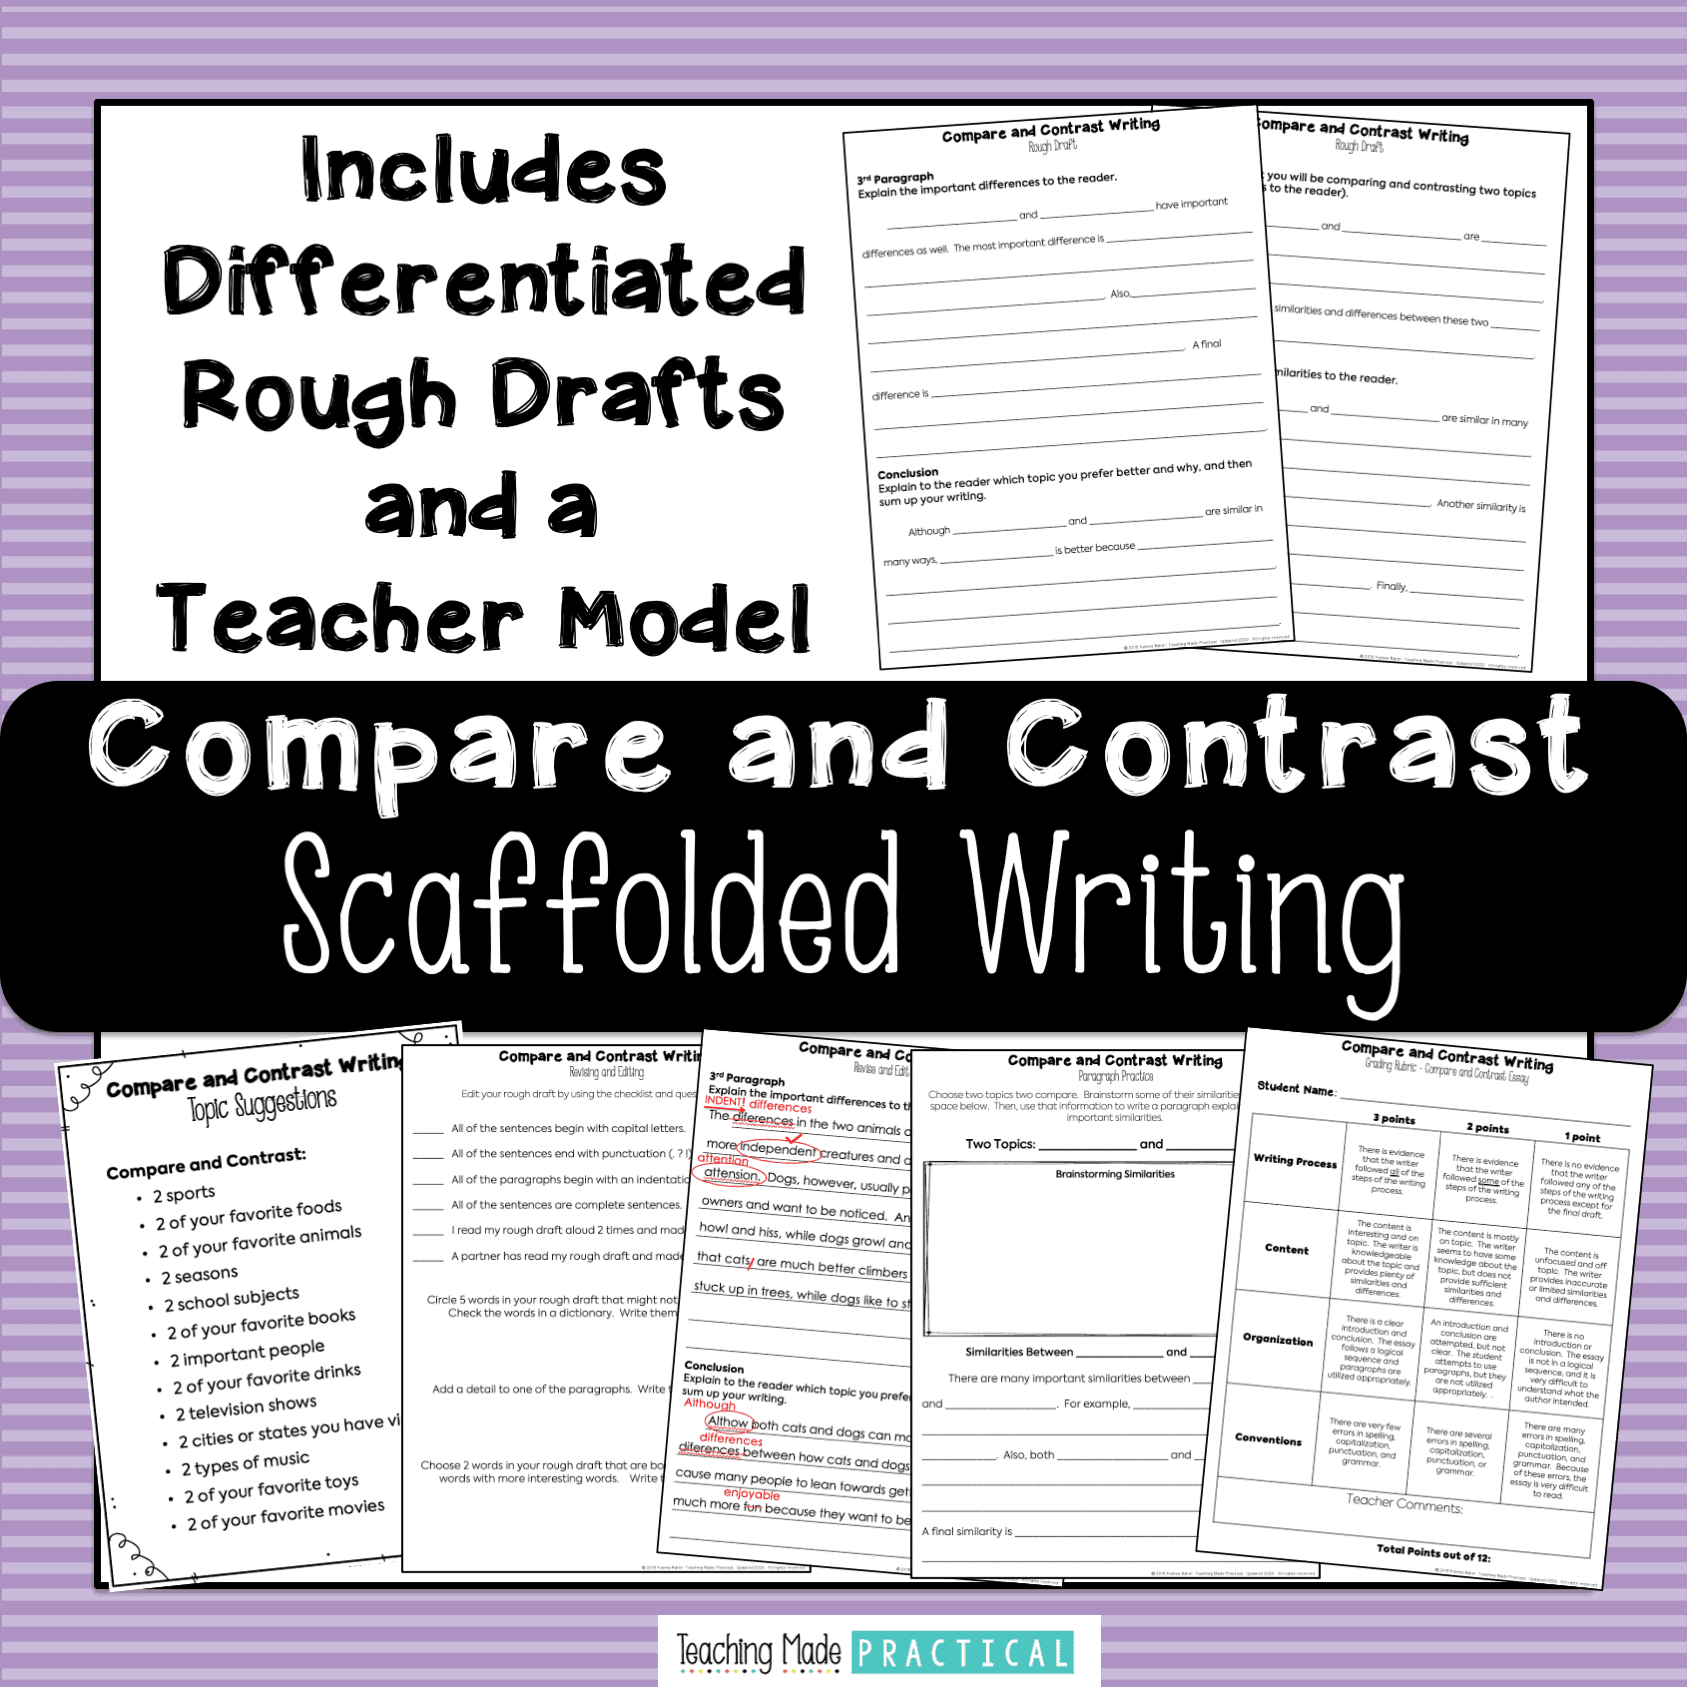 compare and contrast scaffolded writing - includes an essay template for 3rd, 4th, and 5th grade students